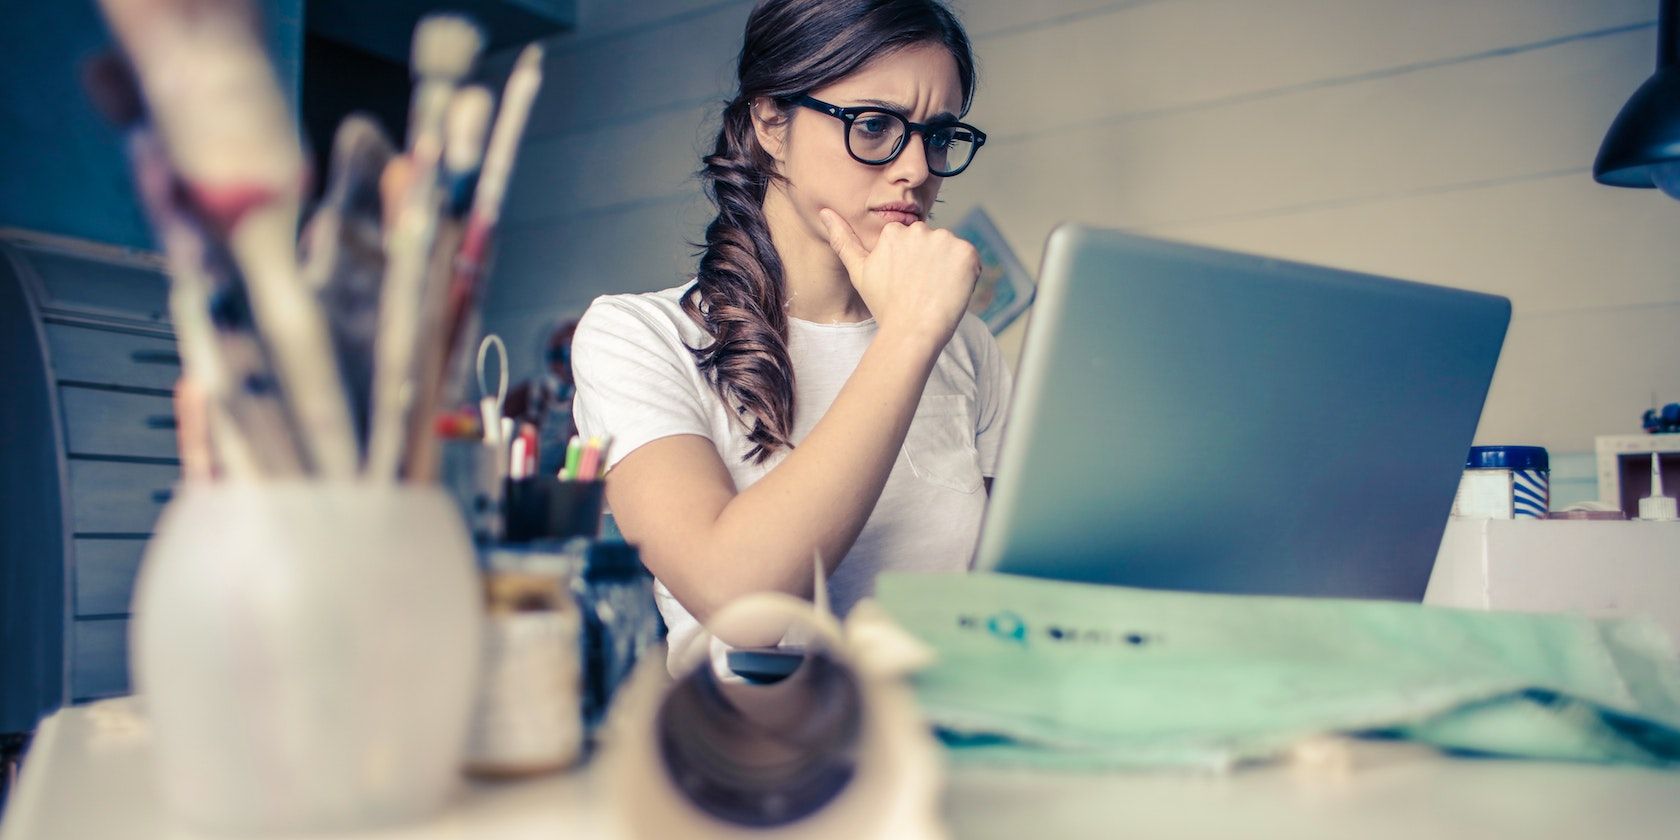 Photo of a woman staring puzzledly at a laptop.